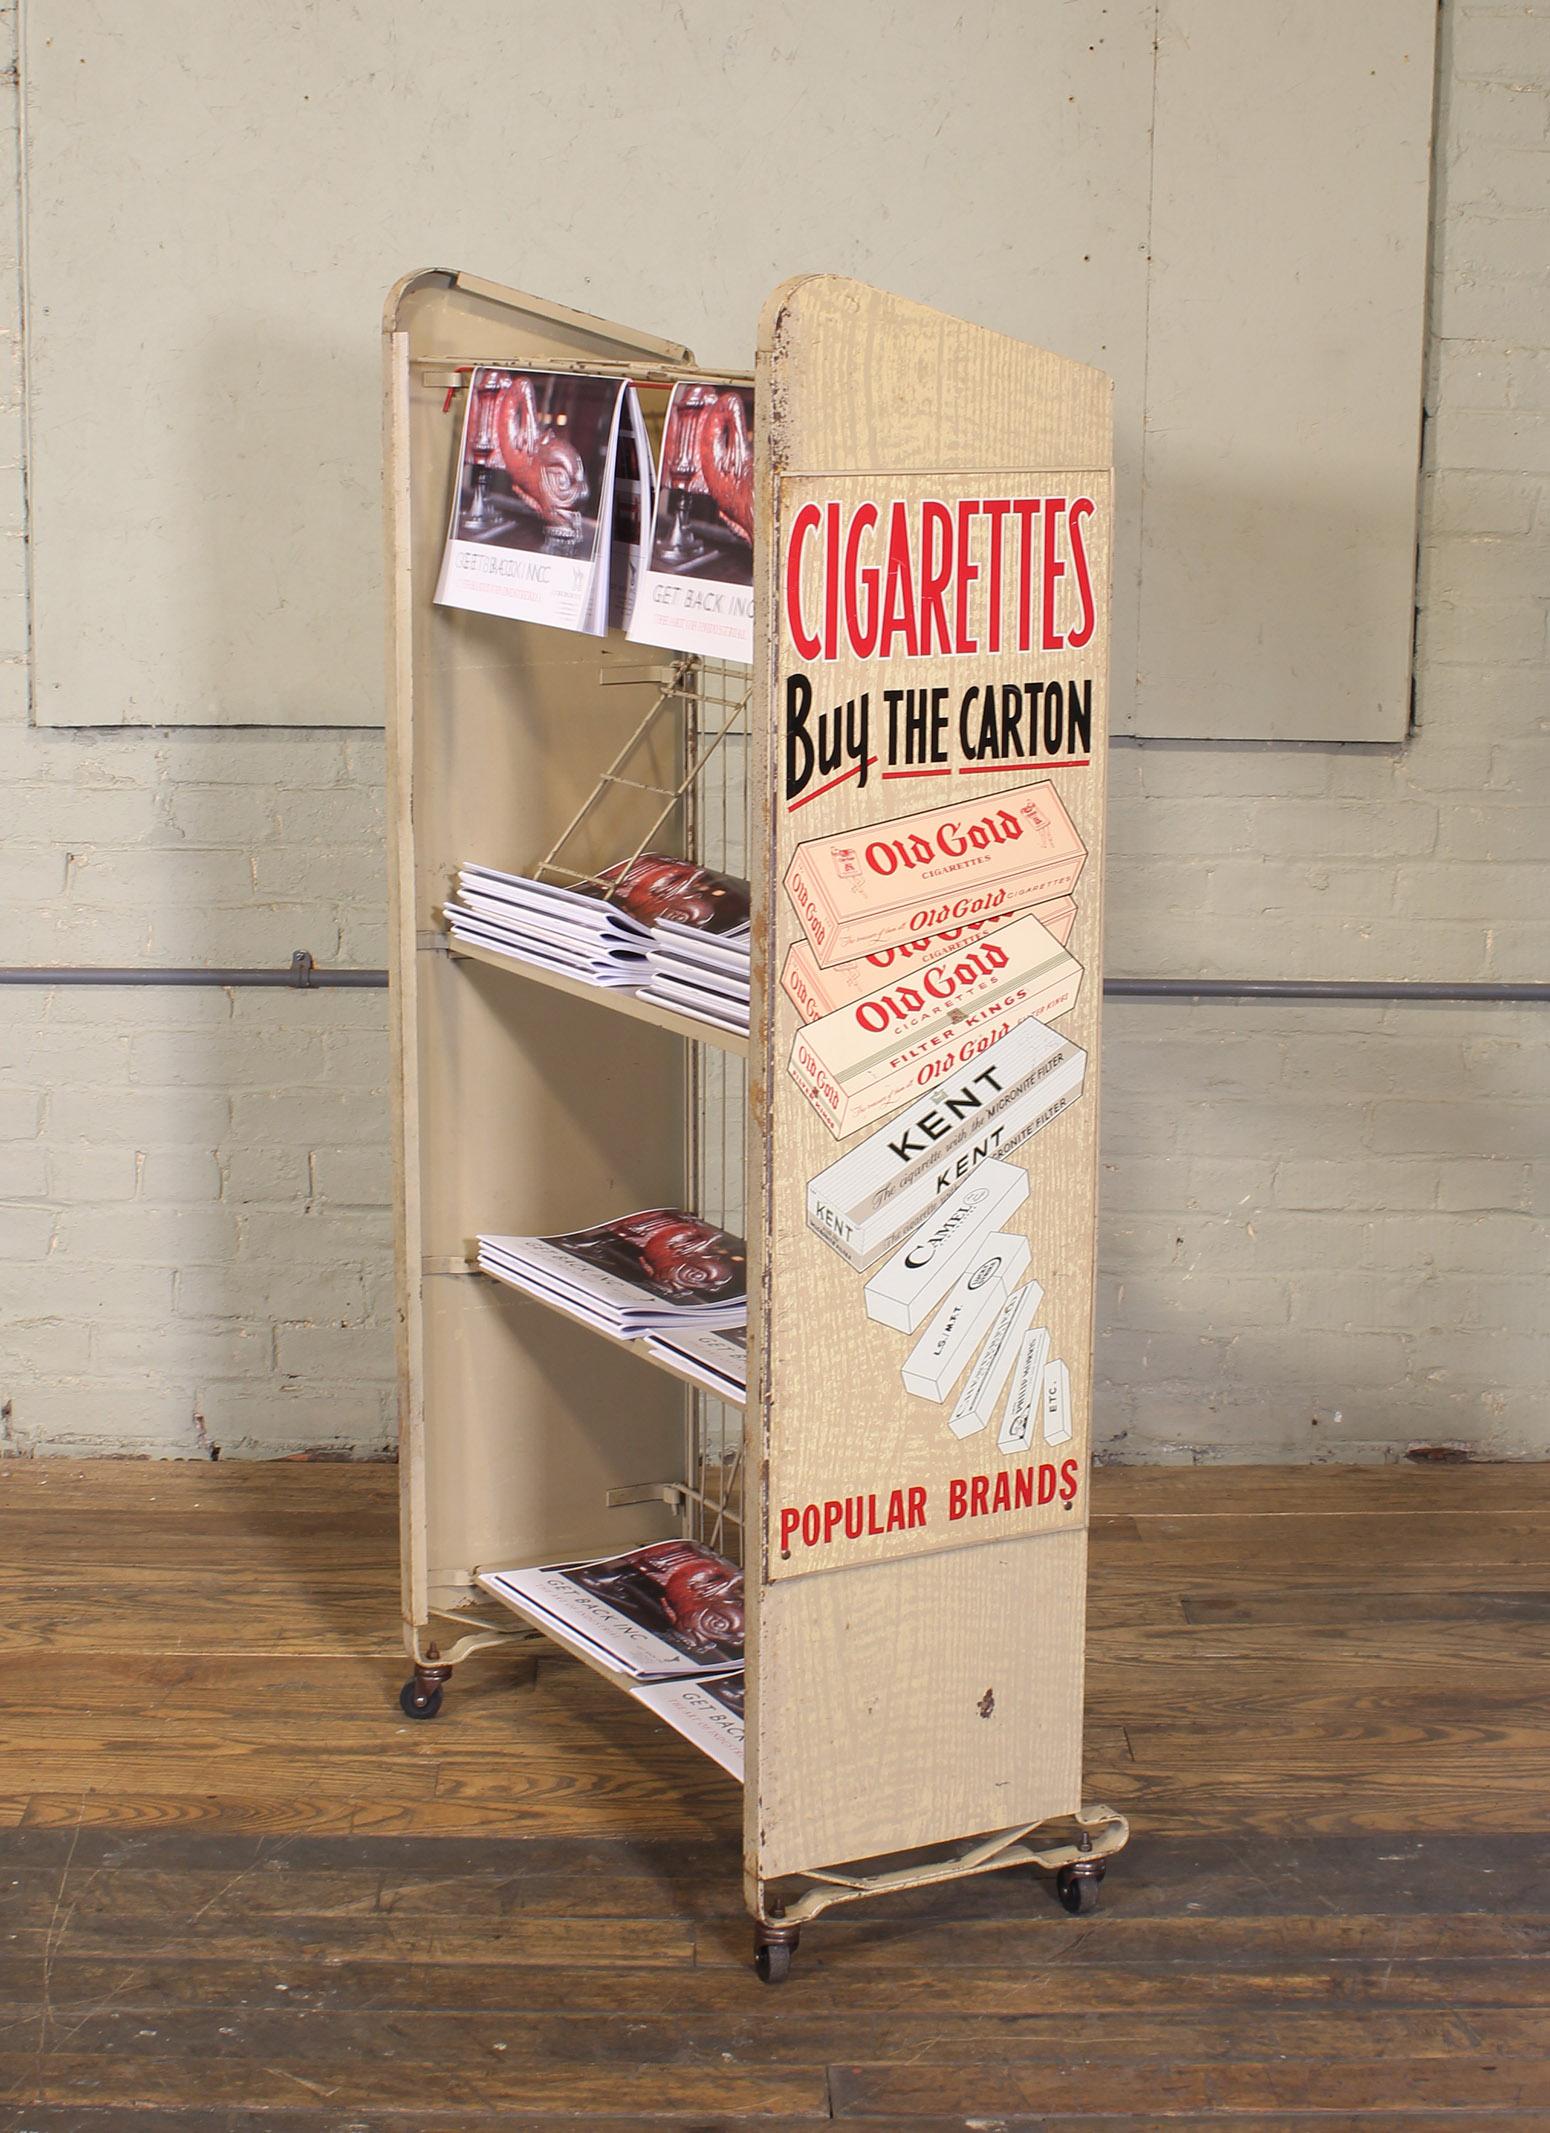 Industrial Vintage Magazine Rolling Rack Newspaper Stand with Tobacco Advertisement